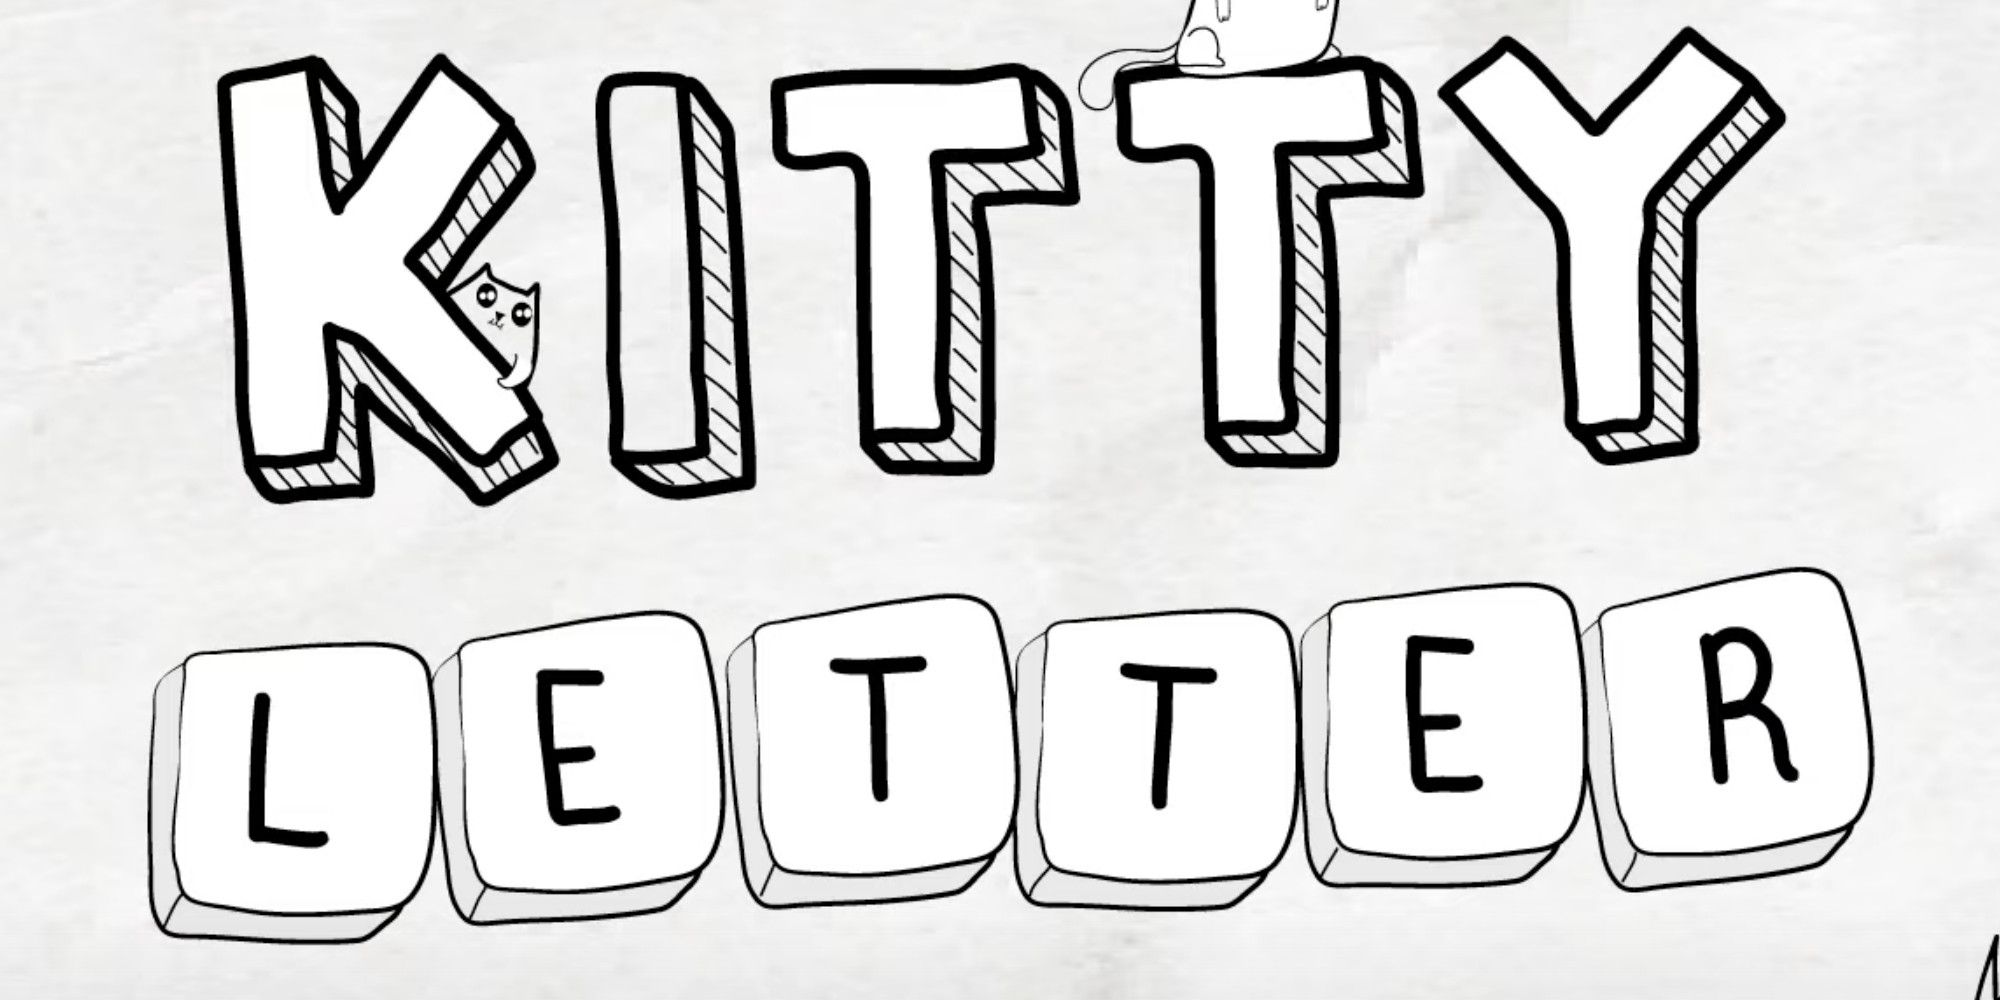 Kitty Letter for Android